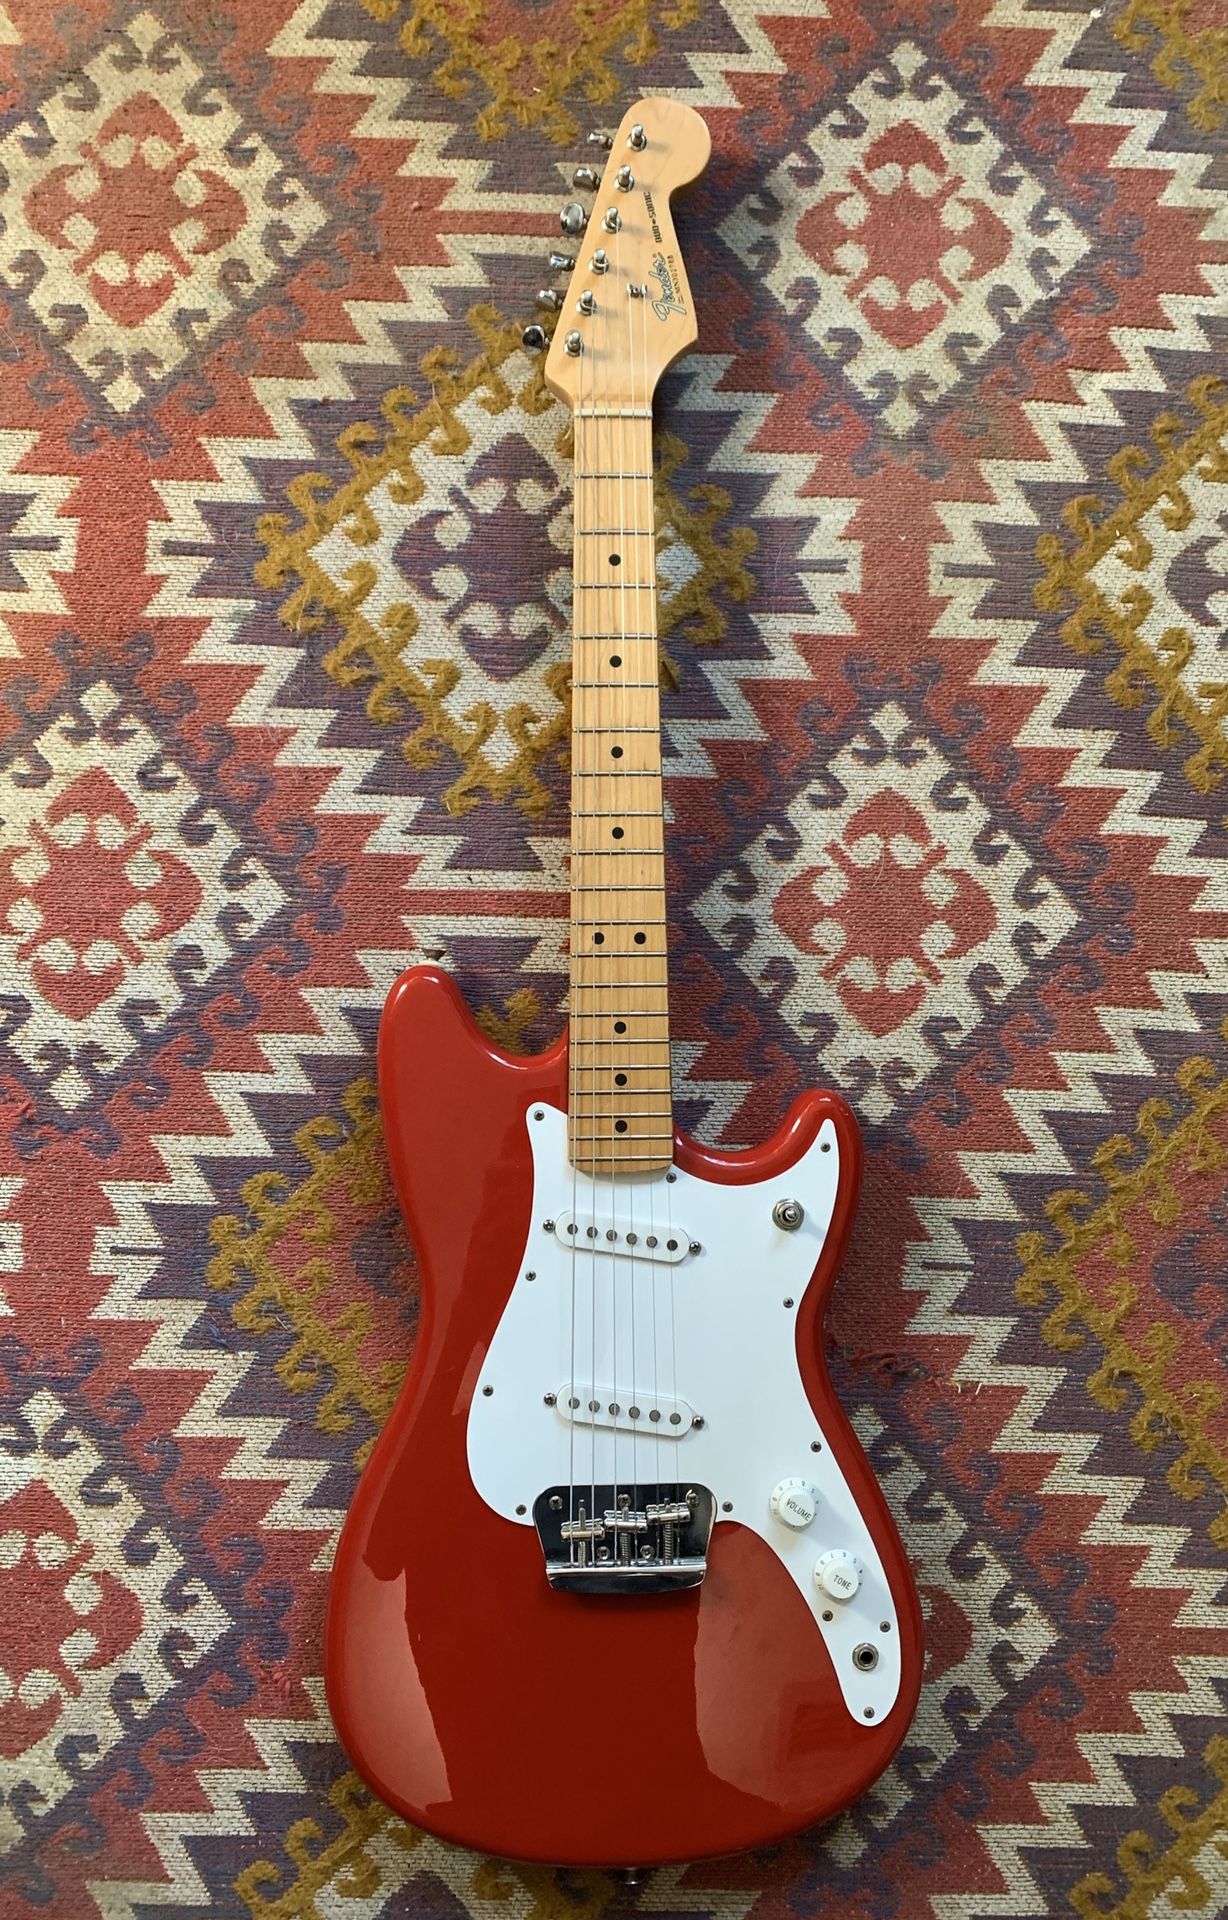 1994 Fender Duo-Sonic for sale or trade